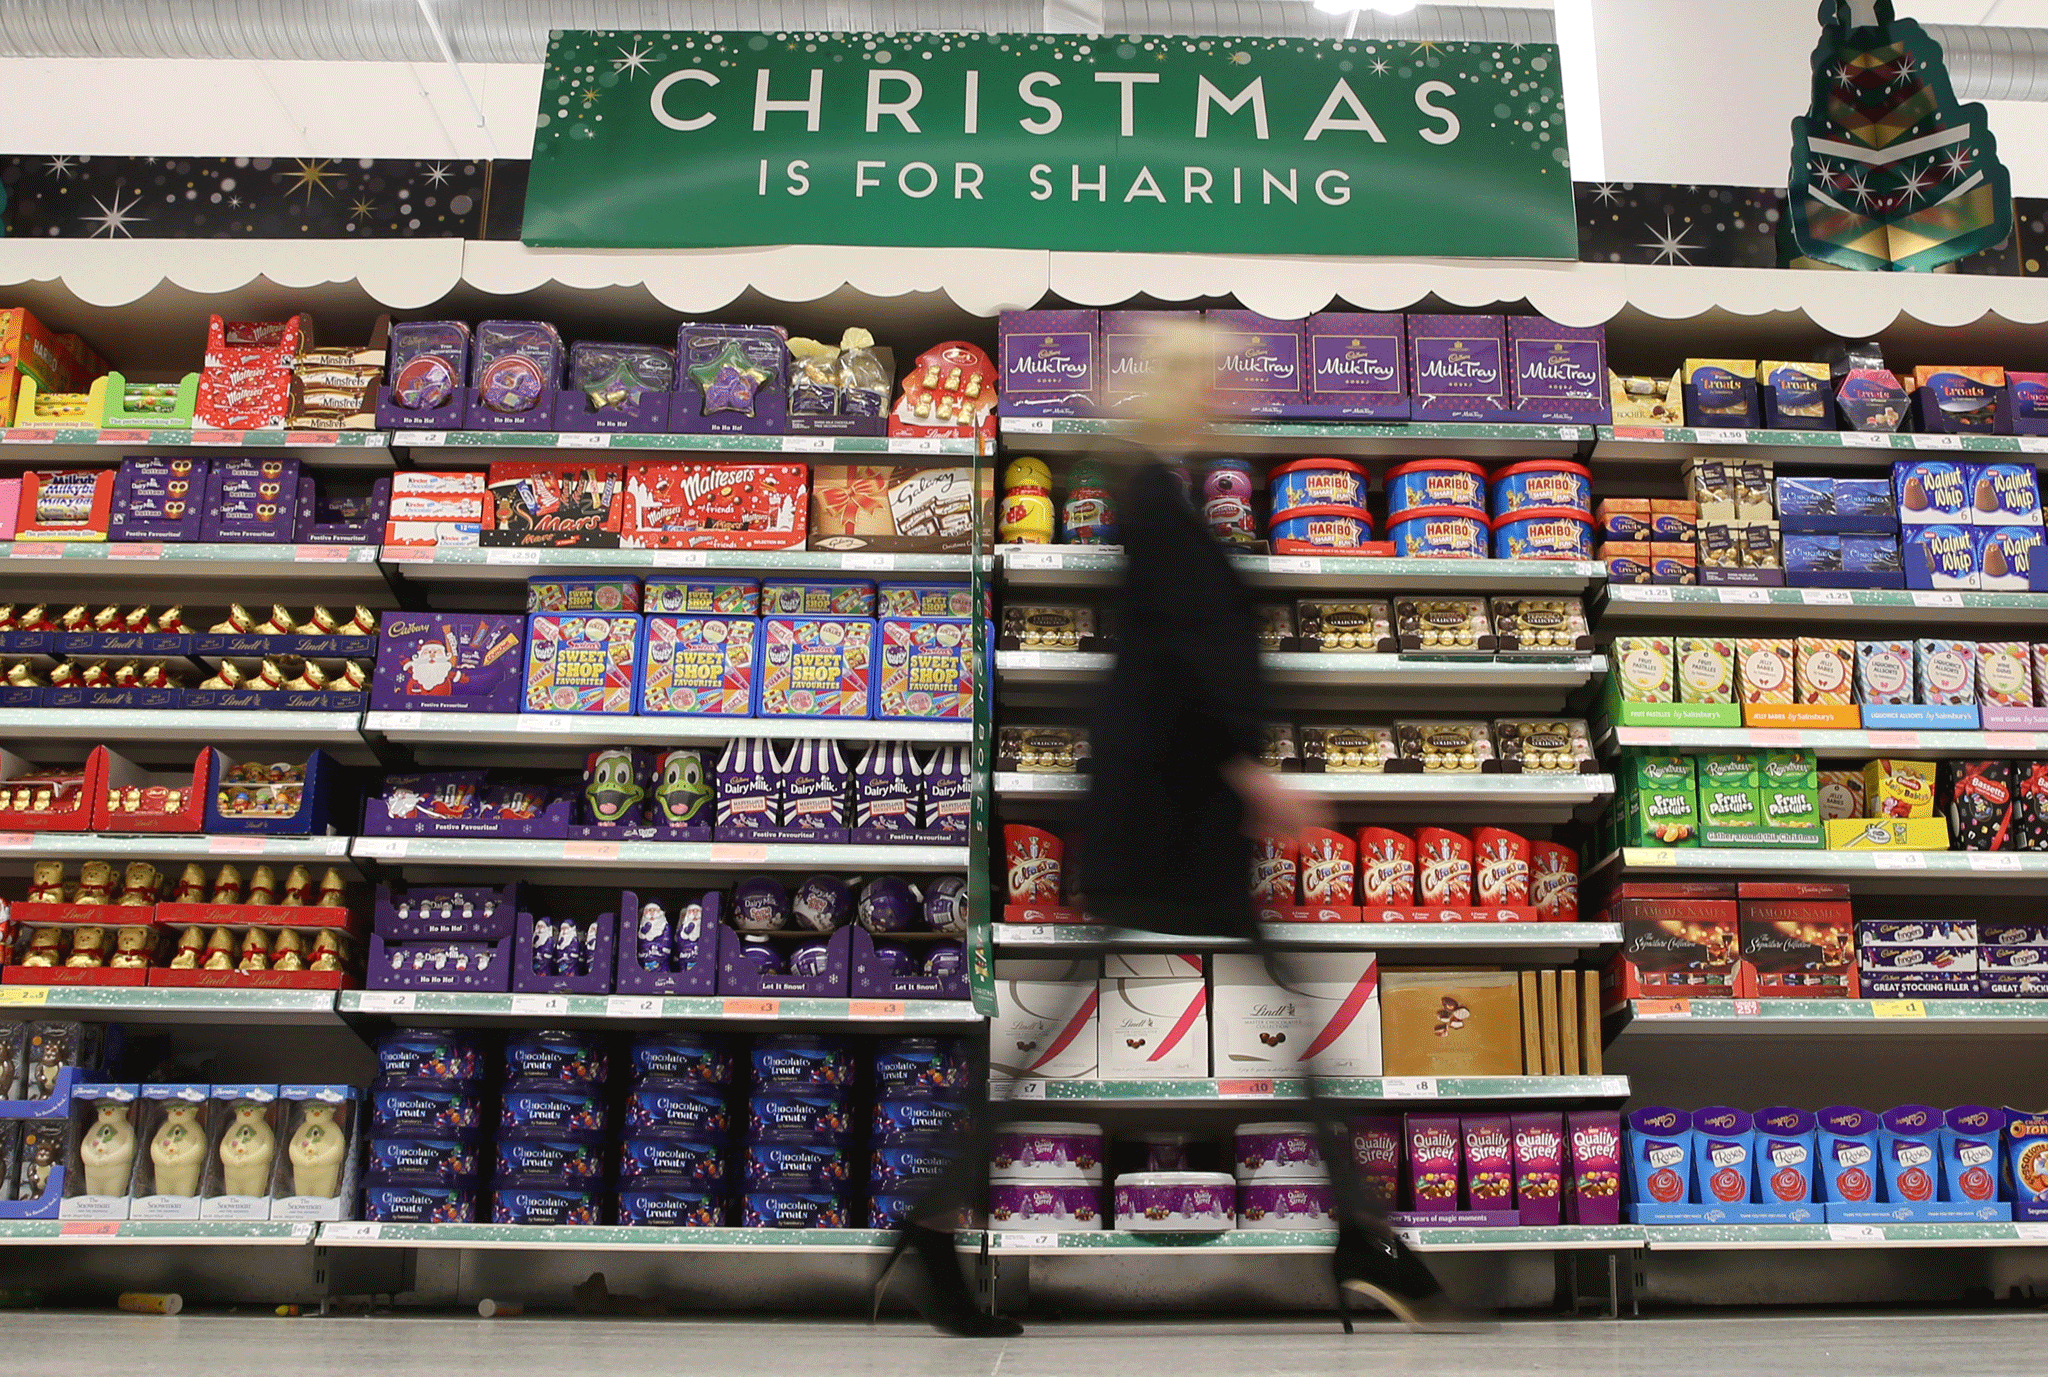 UK Christmas shoppers splashed out an extra £500m on groceries